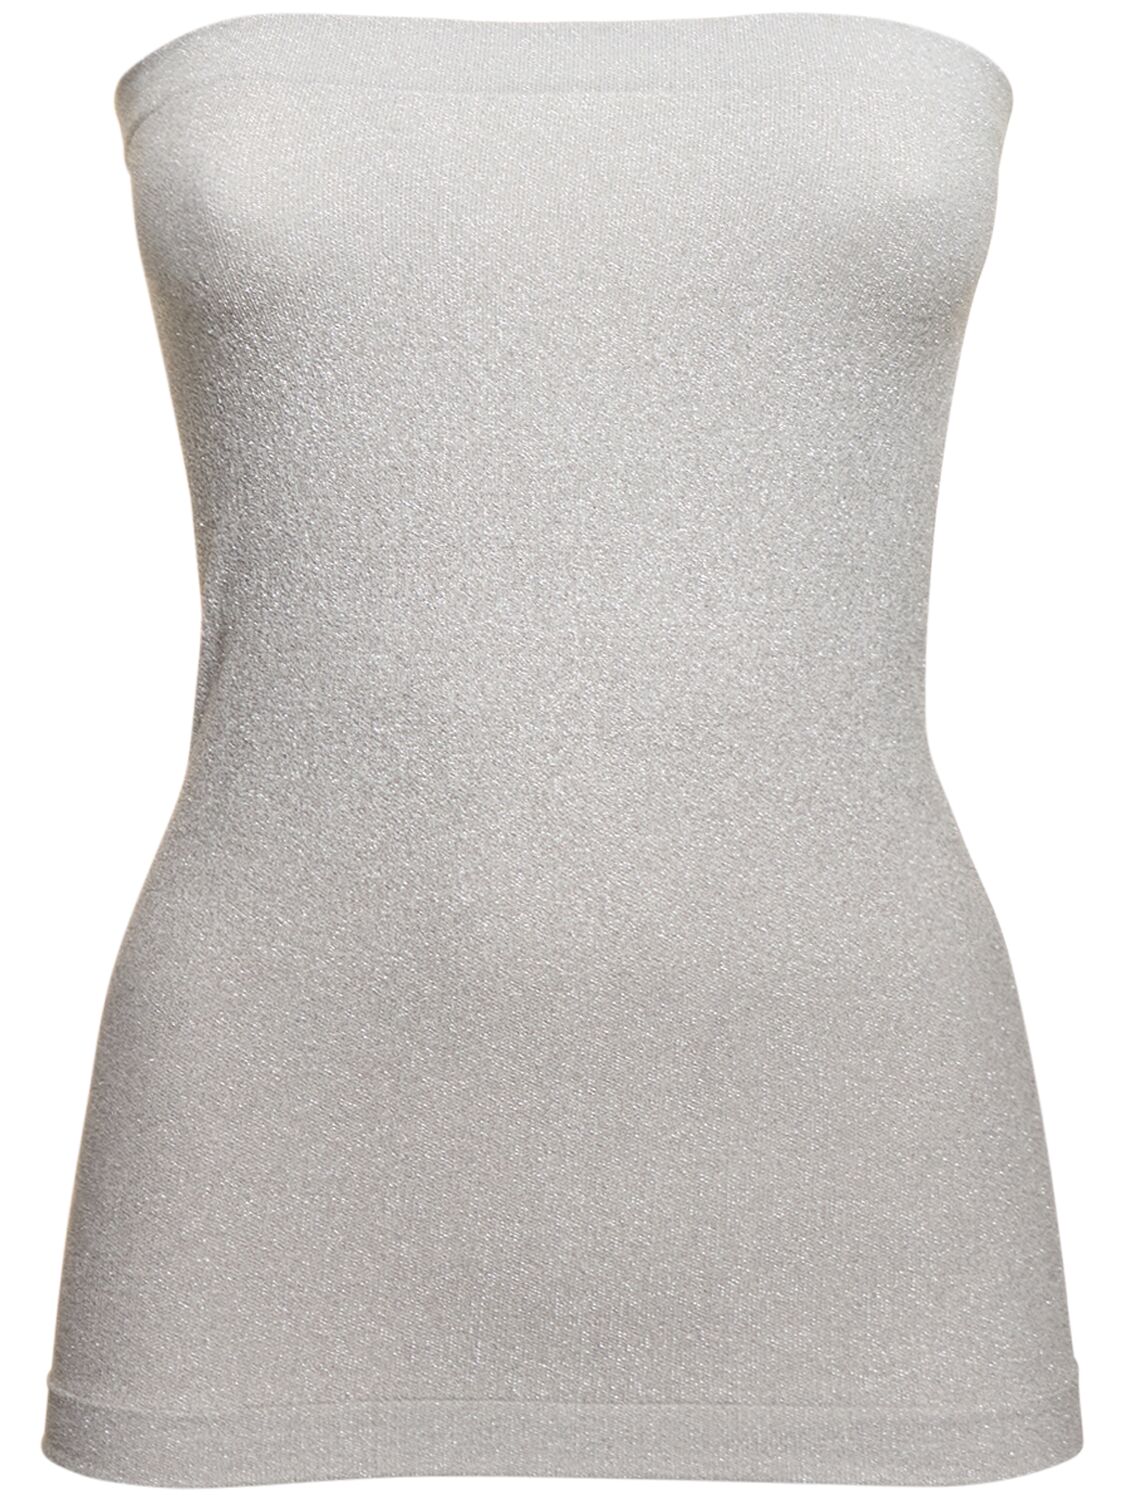 WOLFORD FADING SHINE STRAPLESS TOP